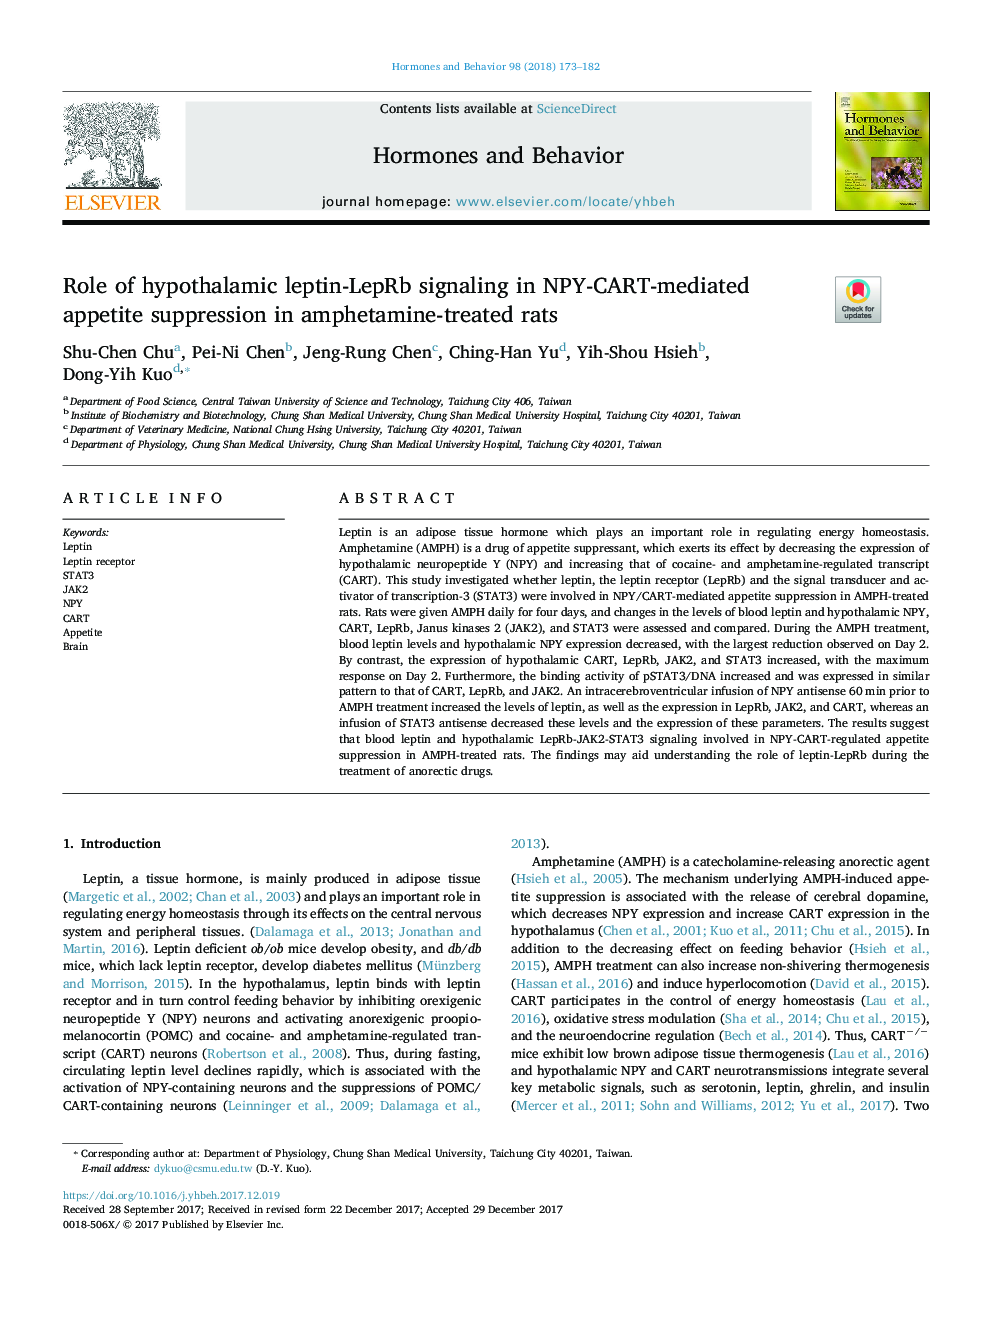 Role of hypothalamic leptin-LepRb signaling in NPY-CART-mediated appetite suppression in amphetamine-treated rats